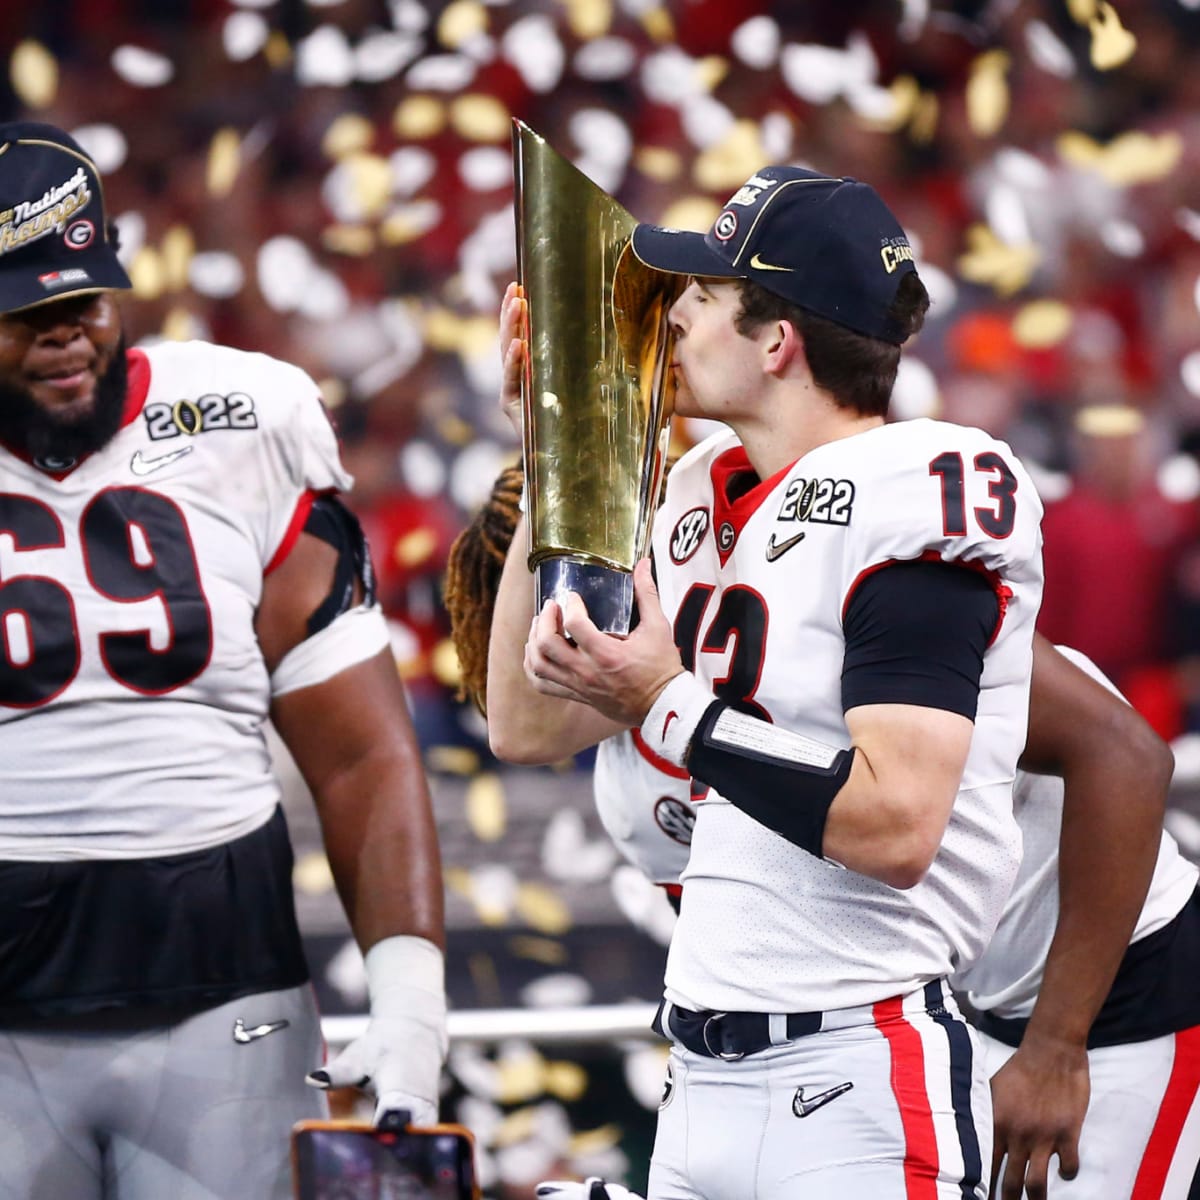 Georgia Football: Can the Bulldogs Repeat as National Champions in 2022? 